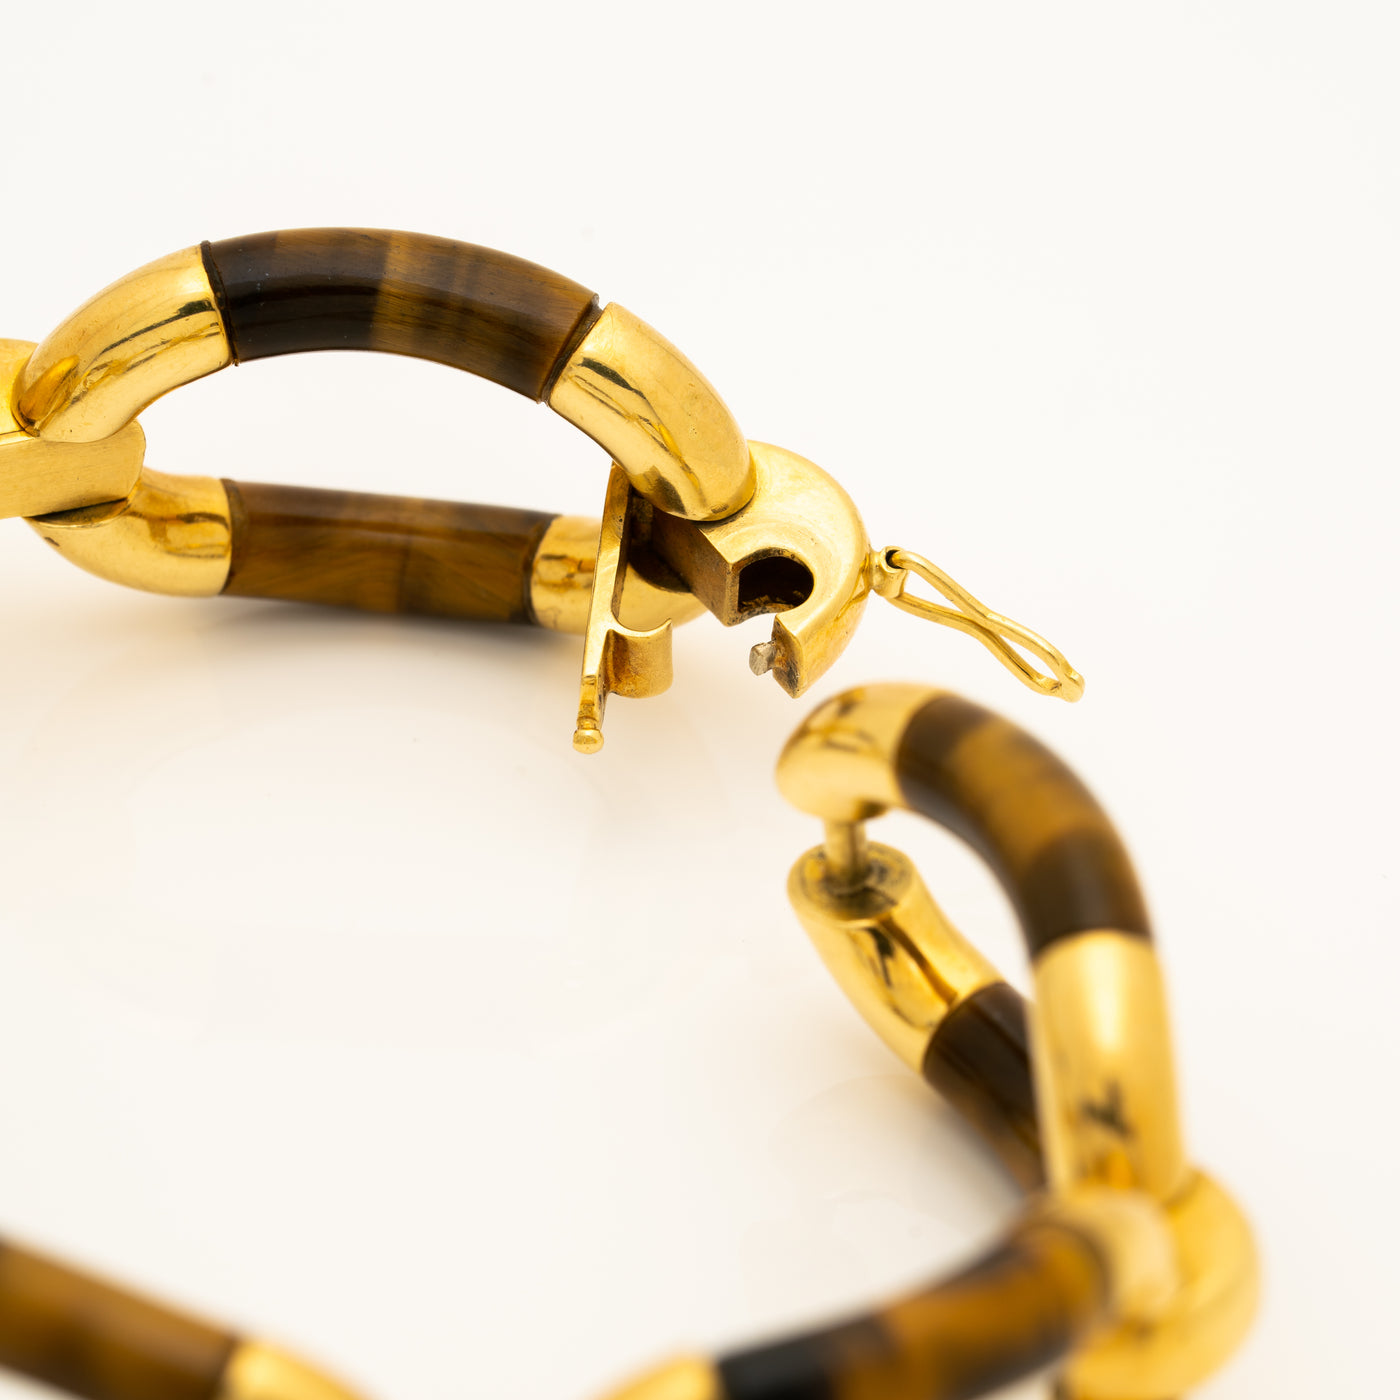 VINTAGE 18K YELLOW GOLD AND TIGERS EYE BRACELET c.1980s